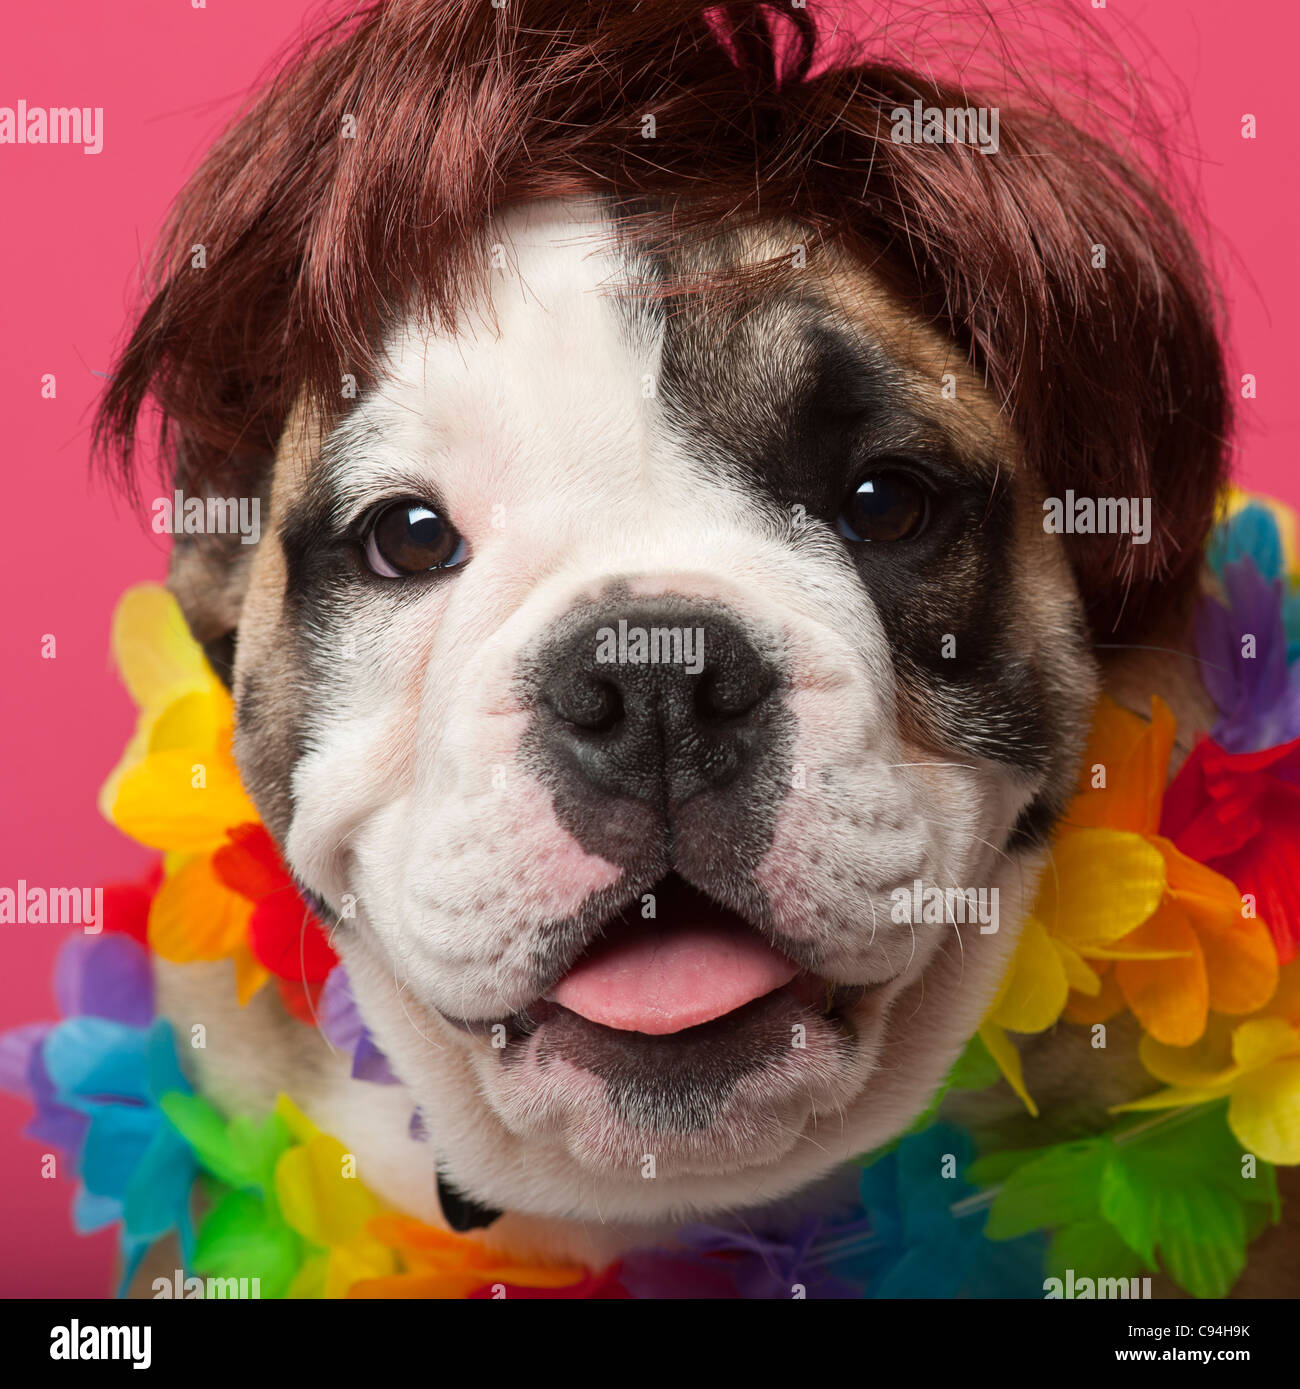 Close-up of English Bulldog puppy wearing a wig and colorful lei, 11 weeks old, in front of pink background Stock Photo